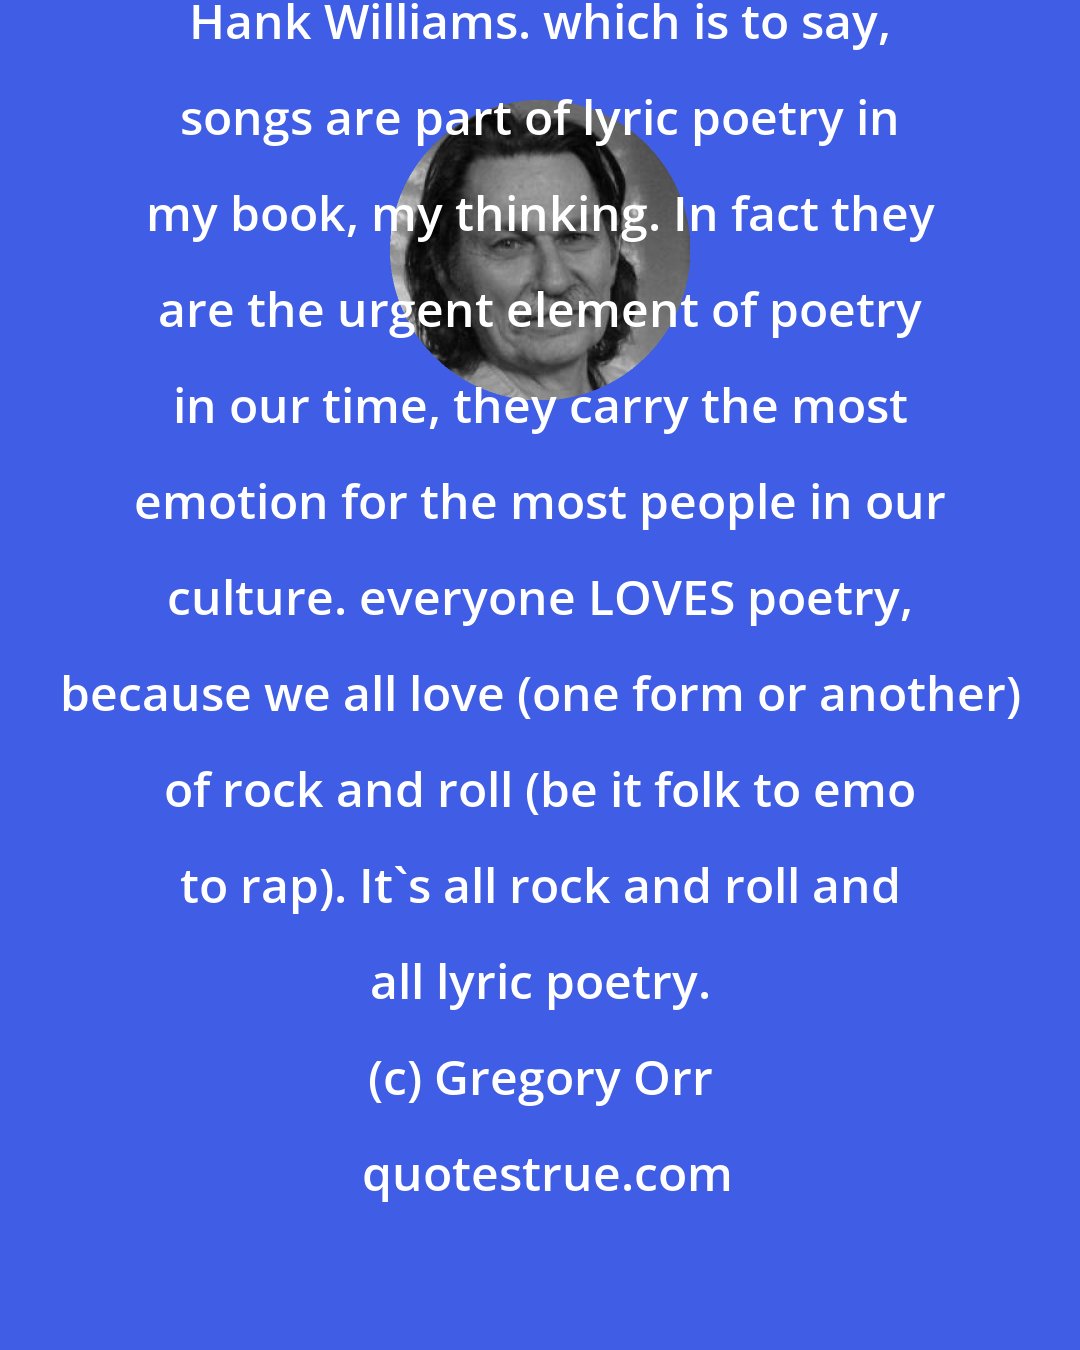 Gregory Orr: Speaking of people I had to exclude: Hank Williams. which is to say, songs are part of lyric poetry in my book, my thinking. In fact they are the urgent element of poetry in our time, they carry the most emotion for the most people in our culture. everyone LOVES poetry, because we all love (one form or another) of rock and roll (be it folk to emo to rap). It's all rock and roll and all lyric poetry.